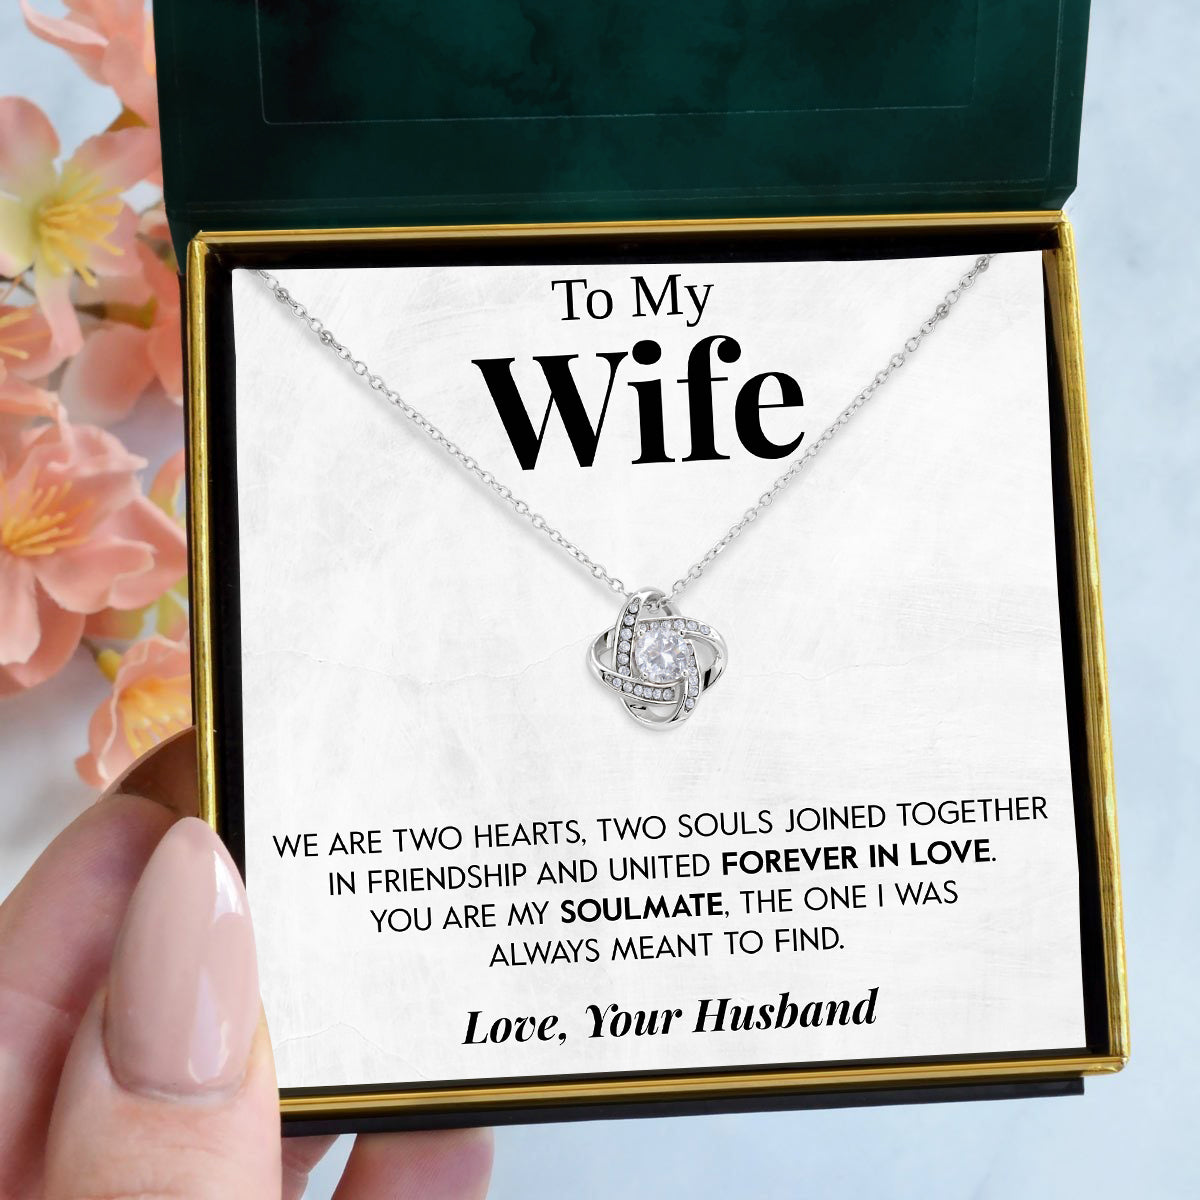 To My Wife | "Forever in Love" | Love Knot Necklace